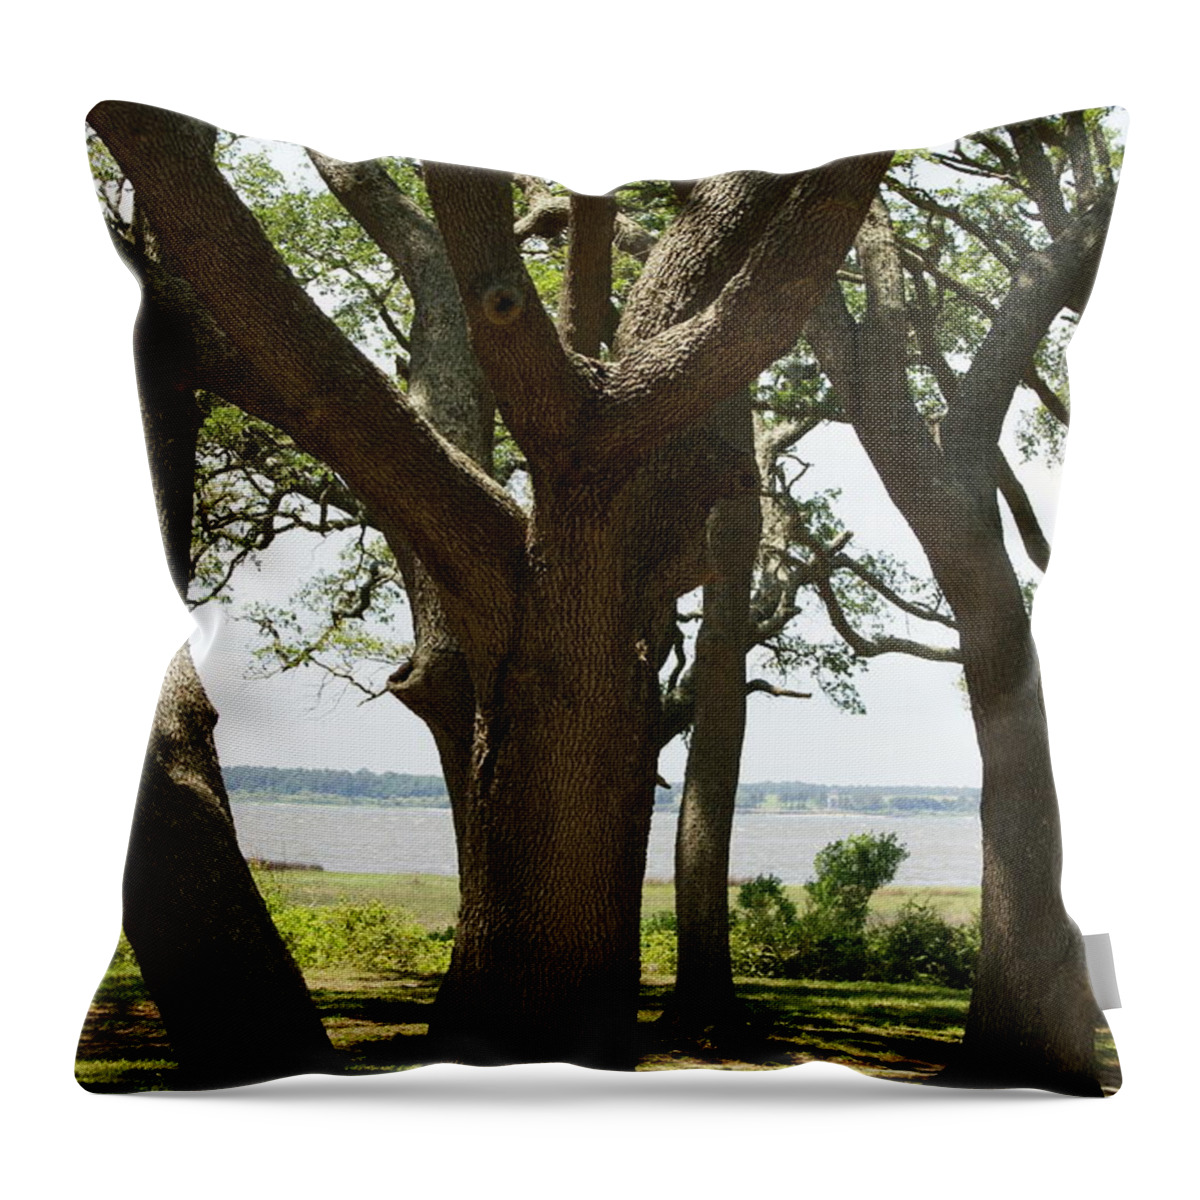  Throw Pillow featuring the photograph Fort Fisher Oak by Heather E Harman